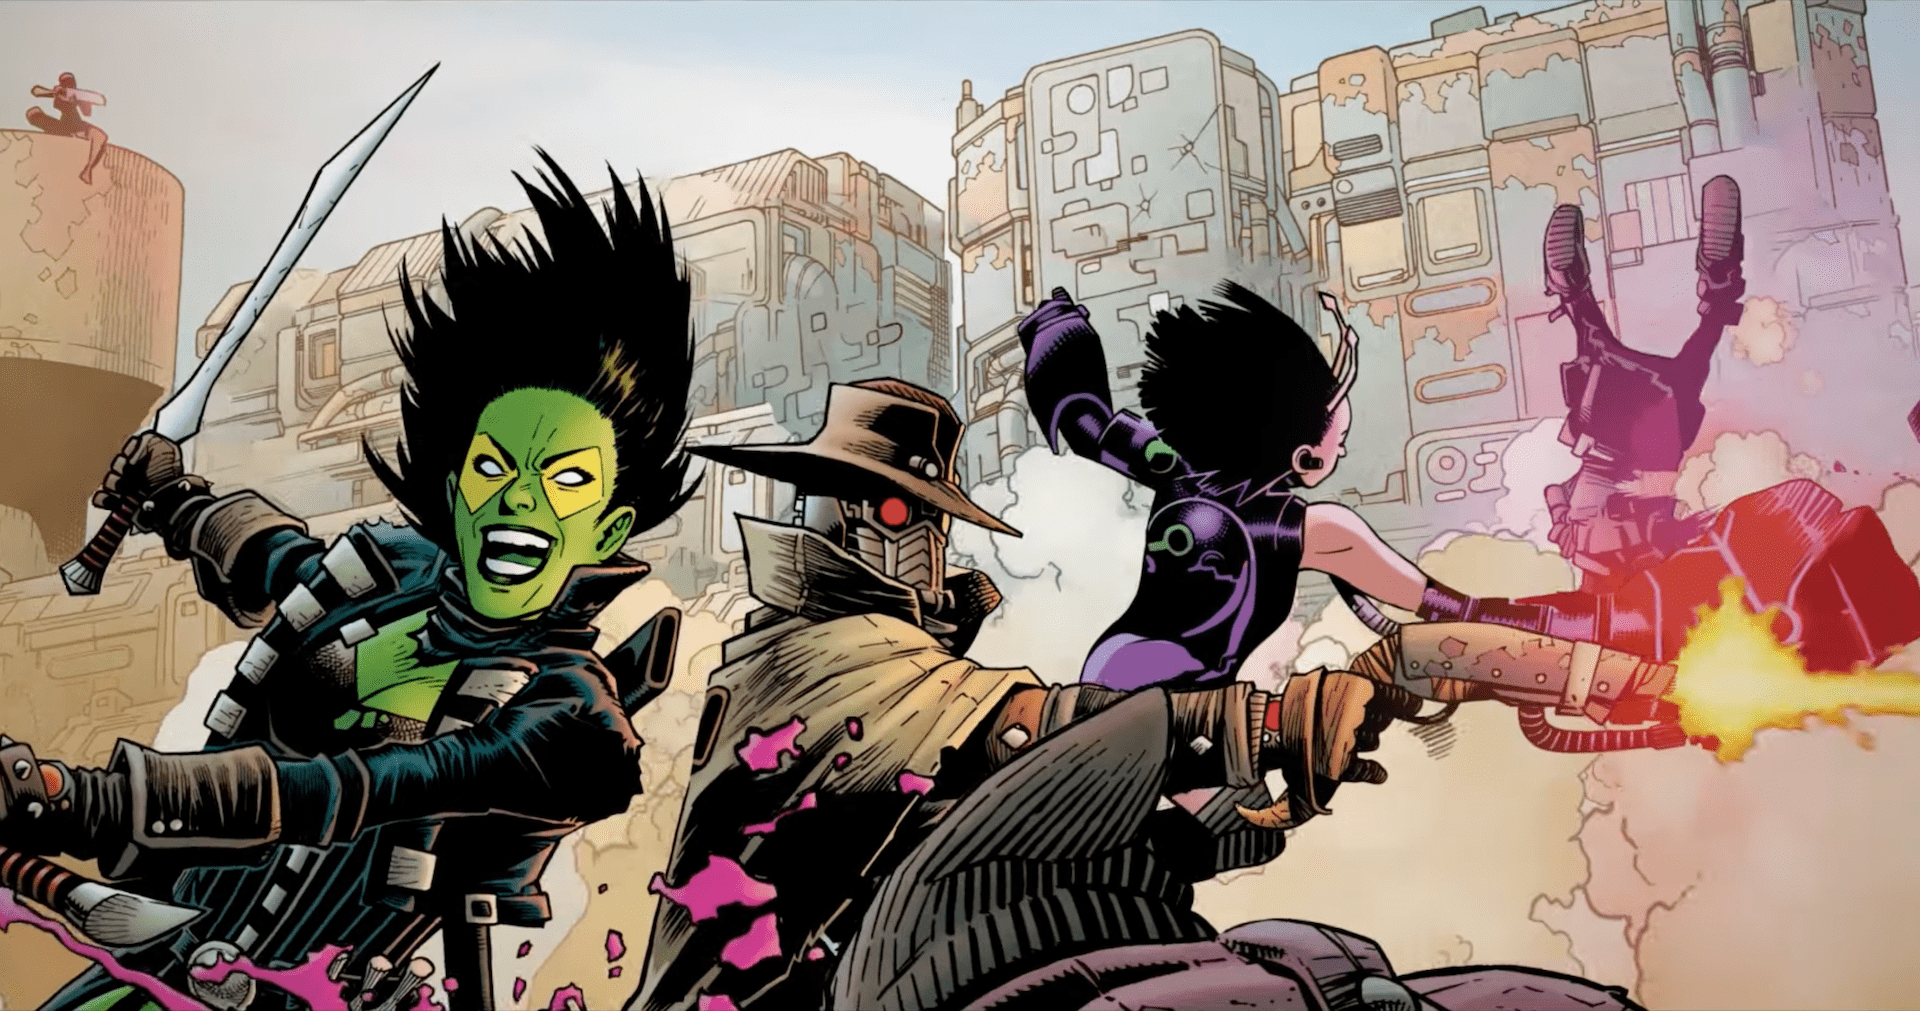 ‘Guardians of the Galaxy’ #1 offers a complex and rich team dynamic